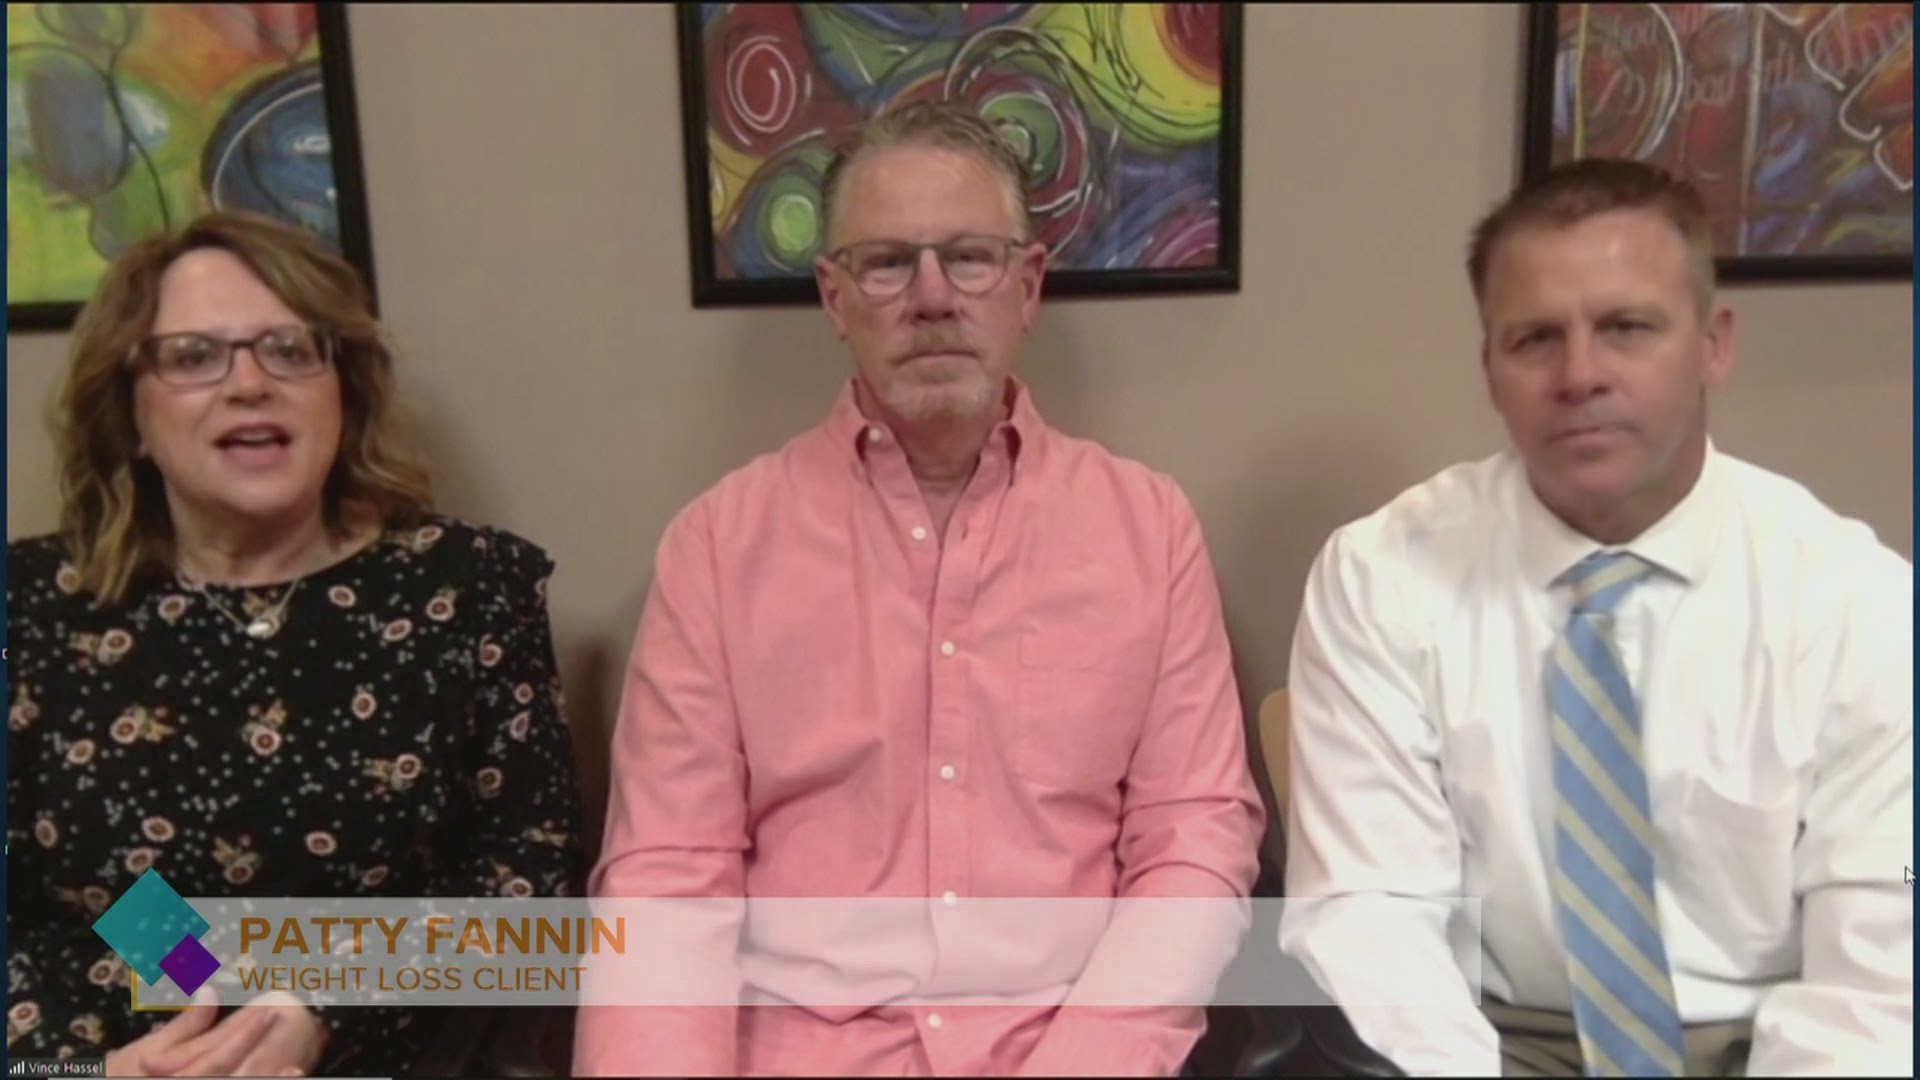 Dr. Vince Hassel helped Patty Fannin & Tim Retz drop nearly 60 lbs (combined) eating real food and following his incredible weight loss program | PAID CONTENT